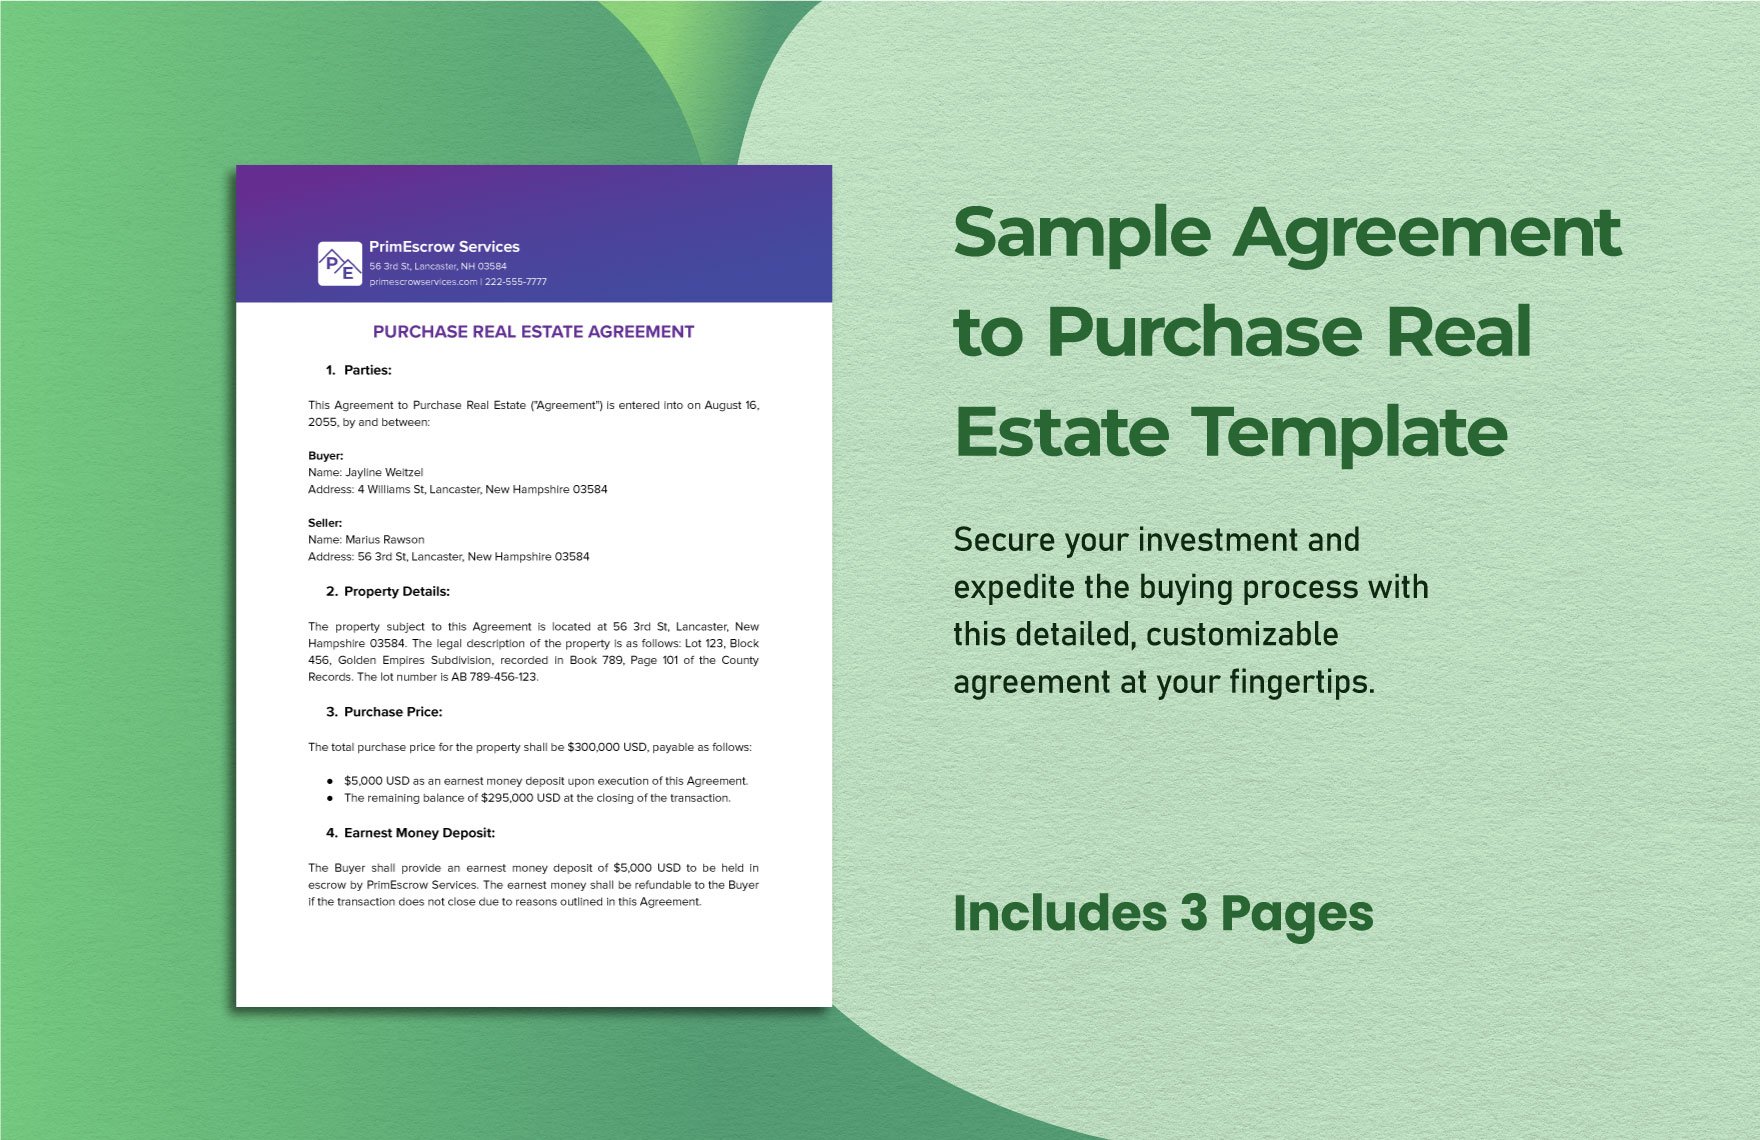 Sample Agreement to Purchase Real Estate Template